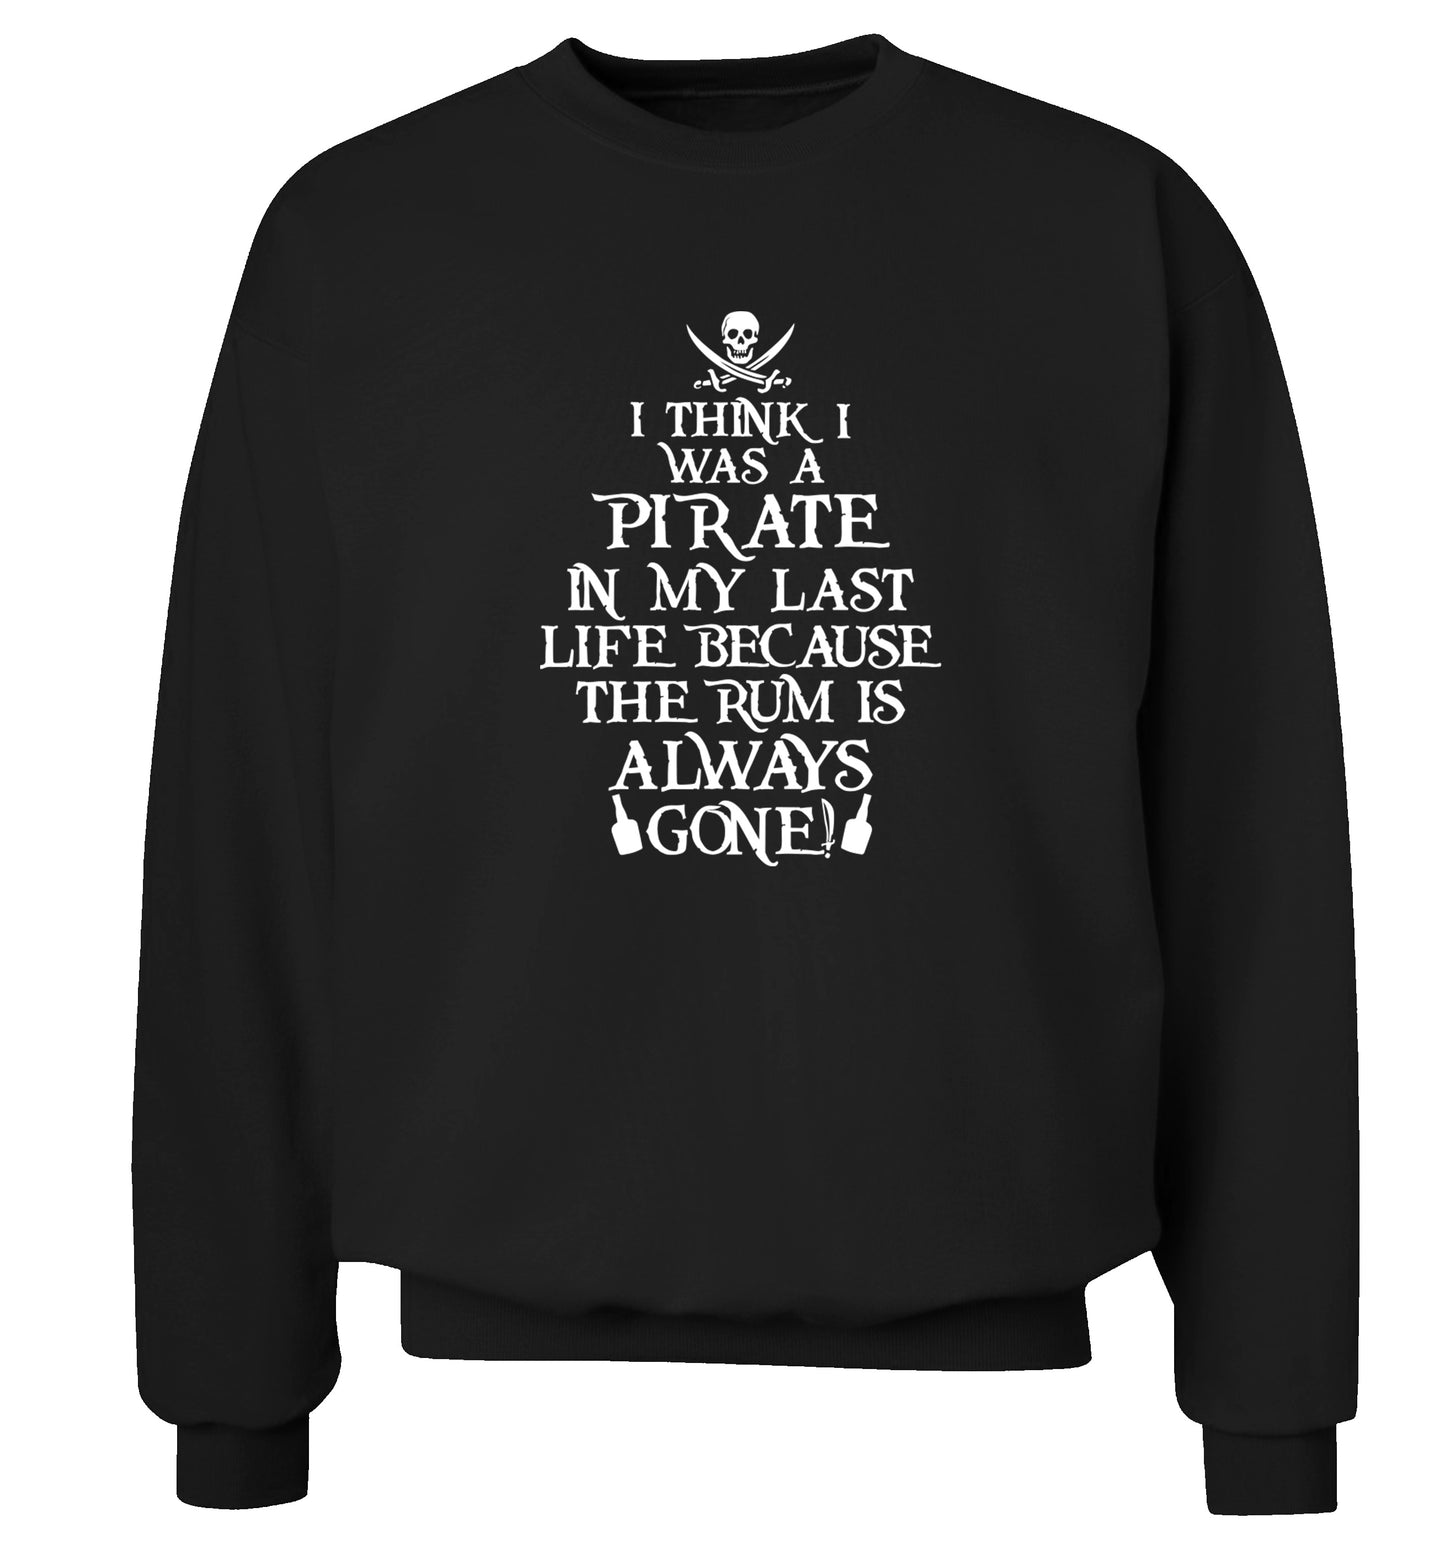 I think I was a pirate in my past life because the rum is always gone! Adult's unisex black Sweater 2XL